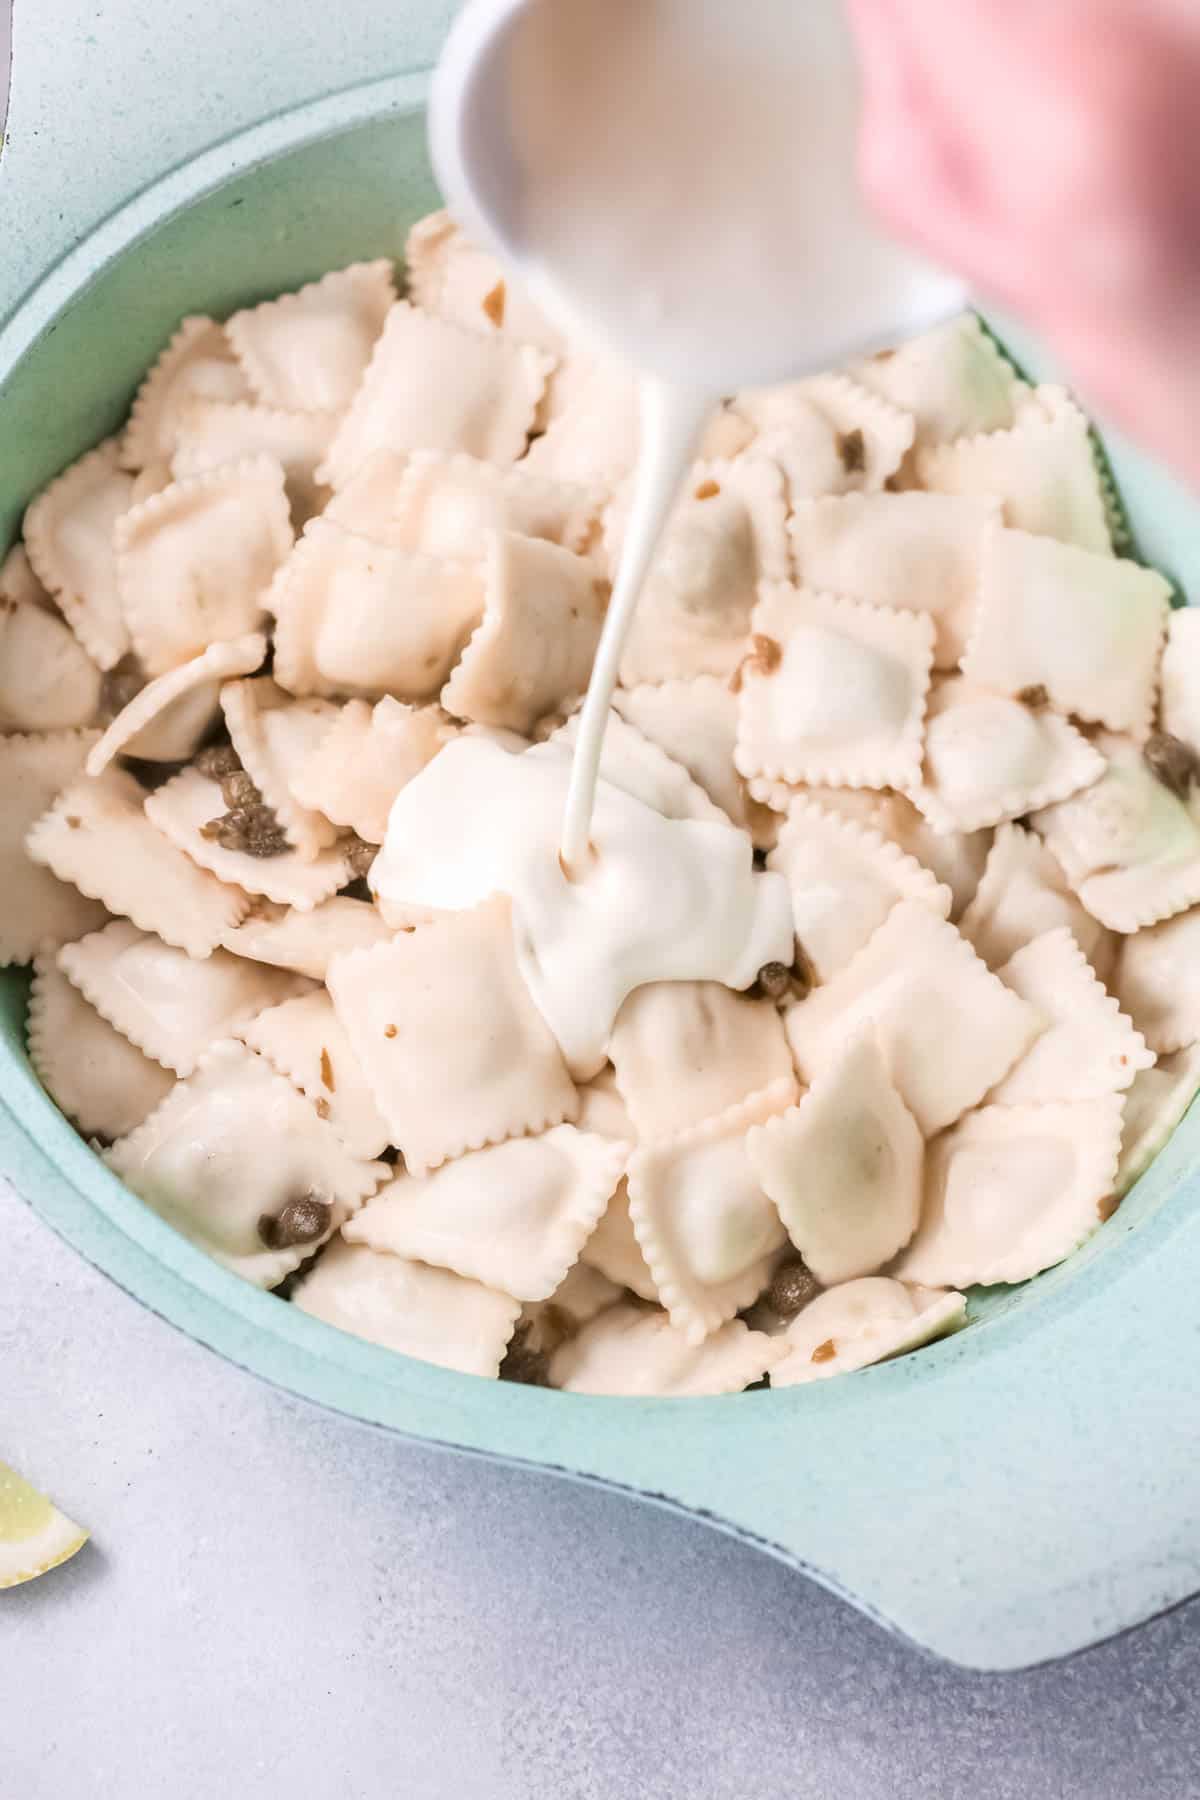 A bowl with ravioli and a woman adding heavy cream.